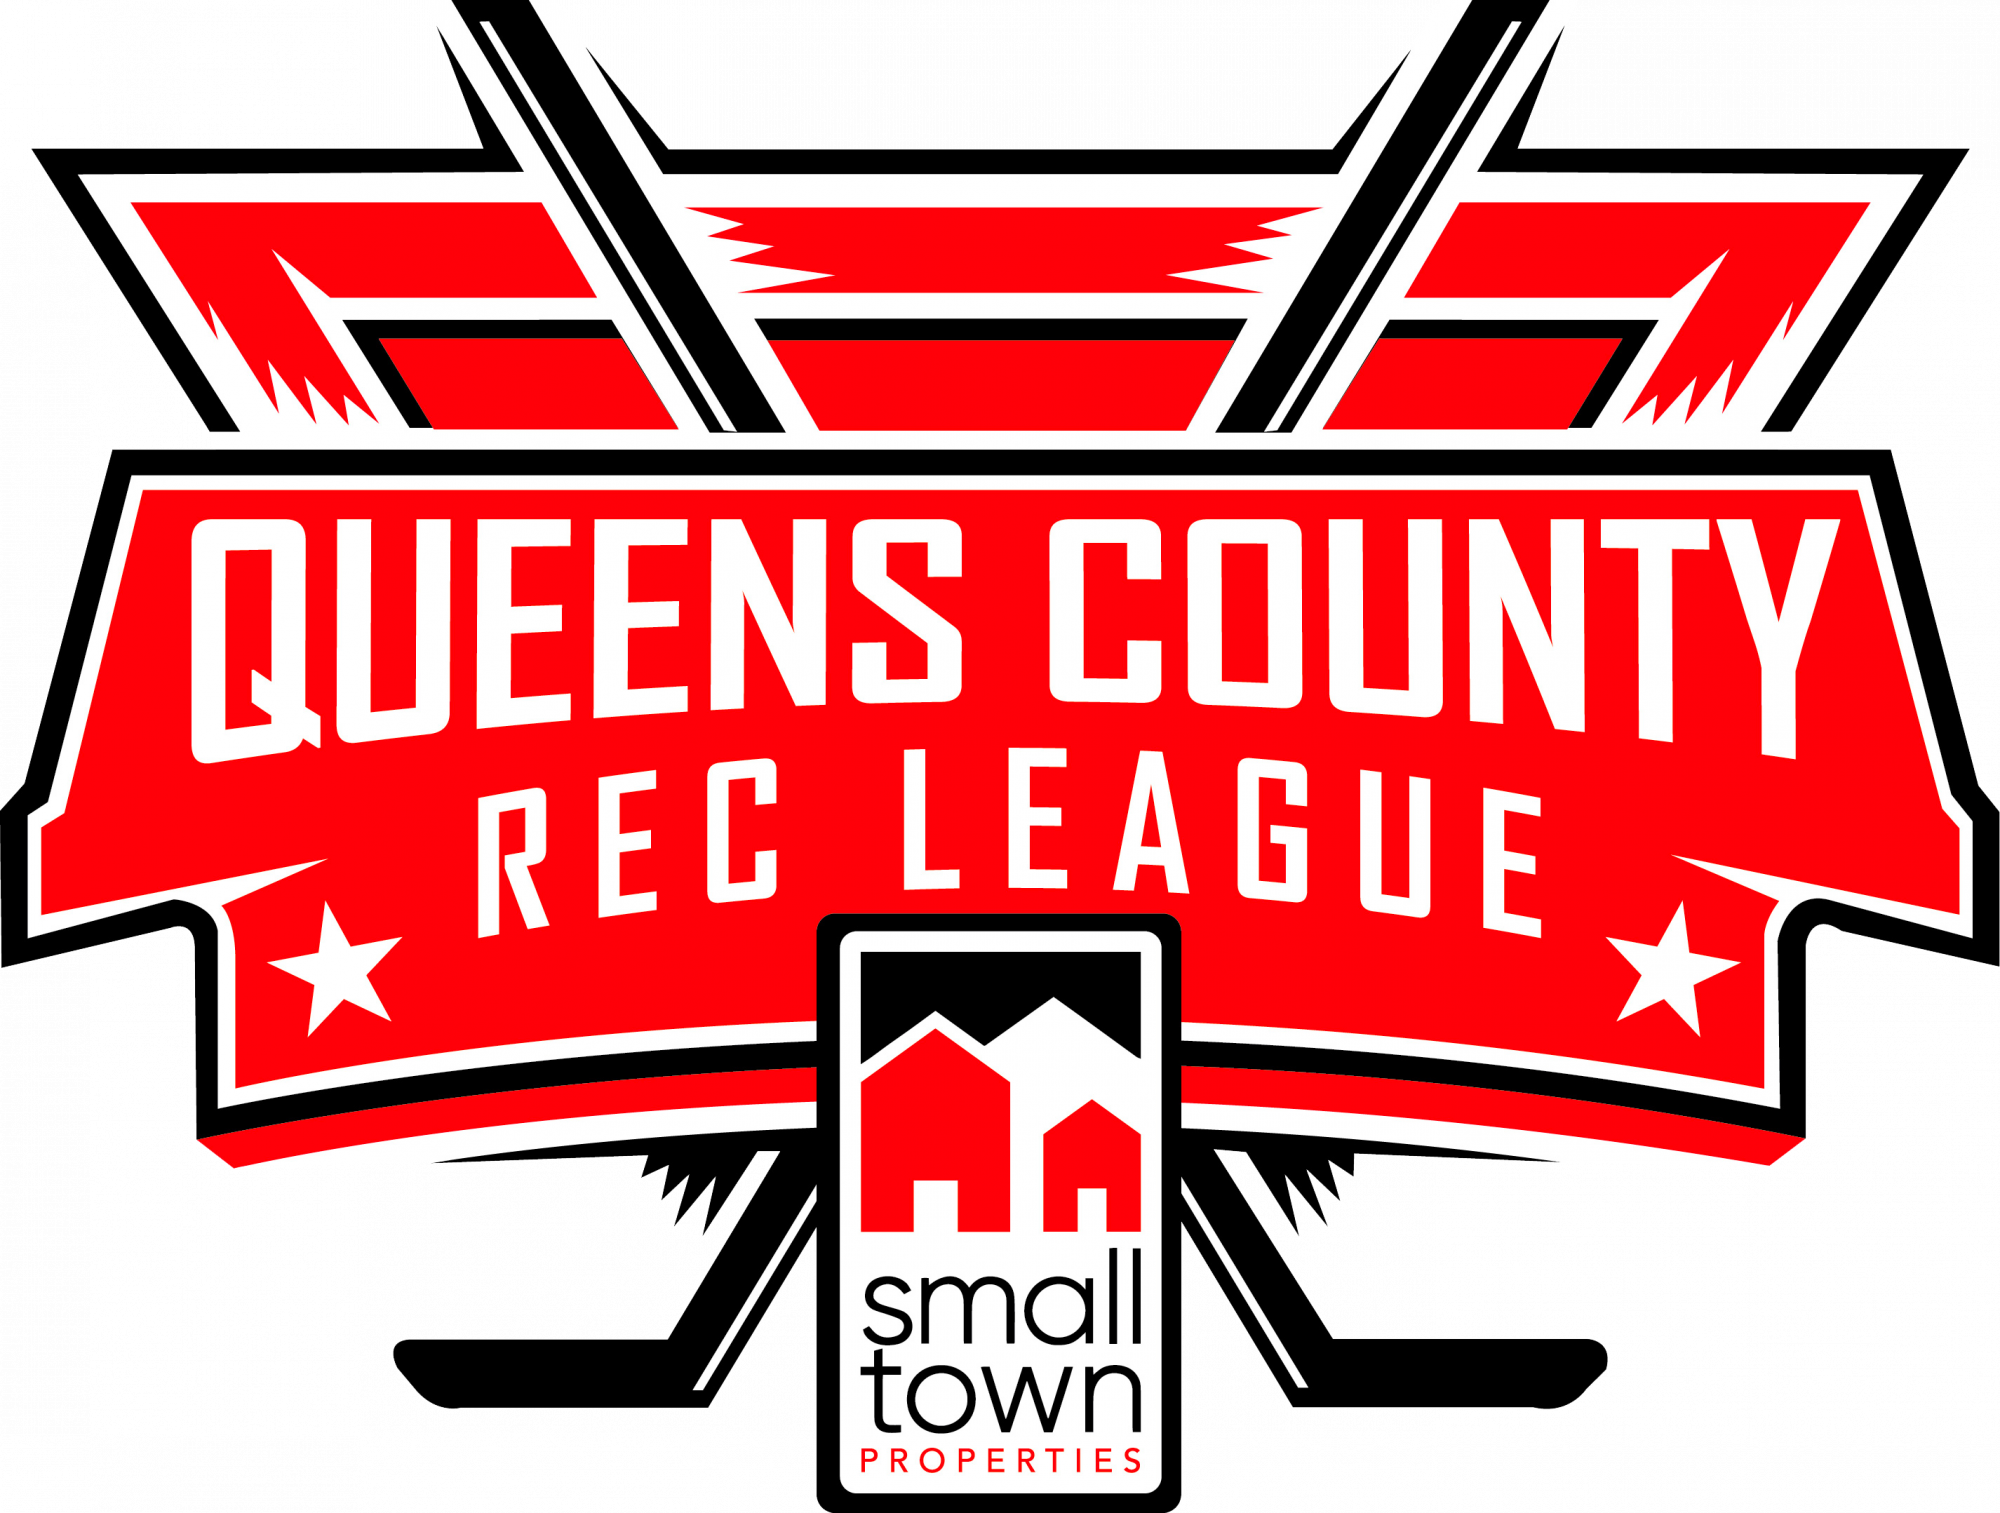 Queens County Rec League Small Town